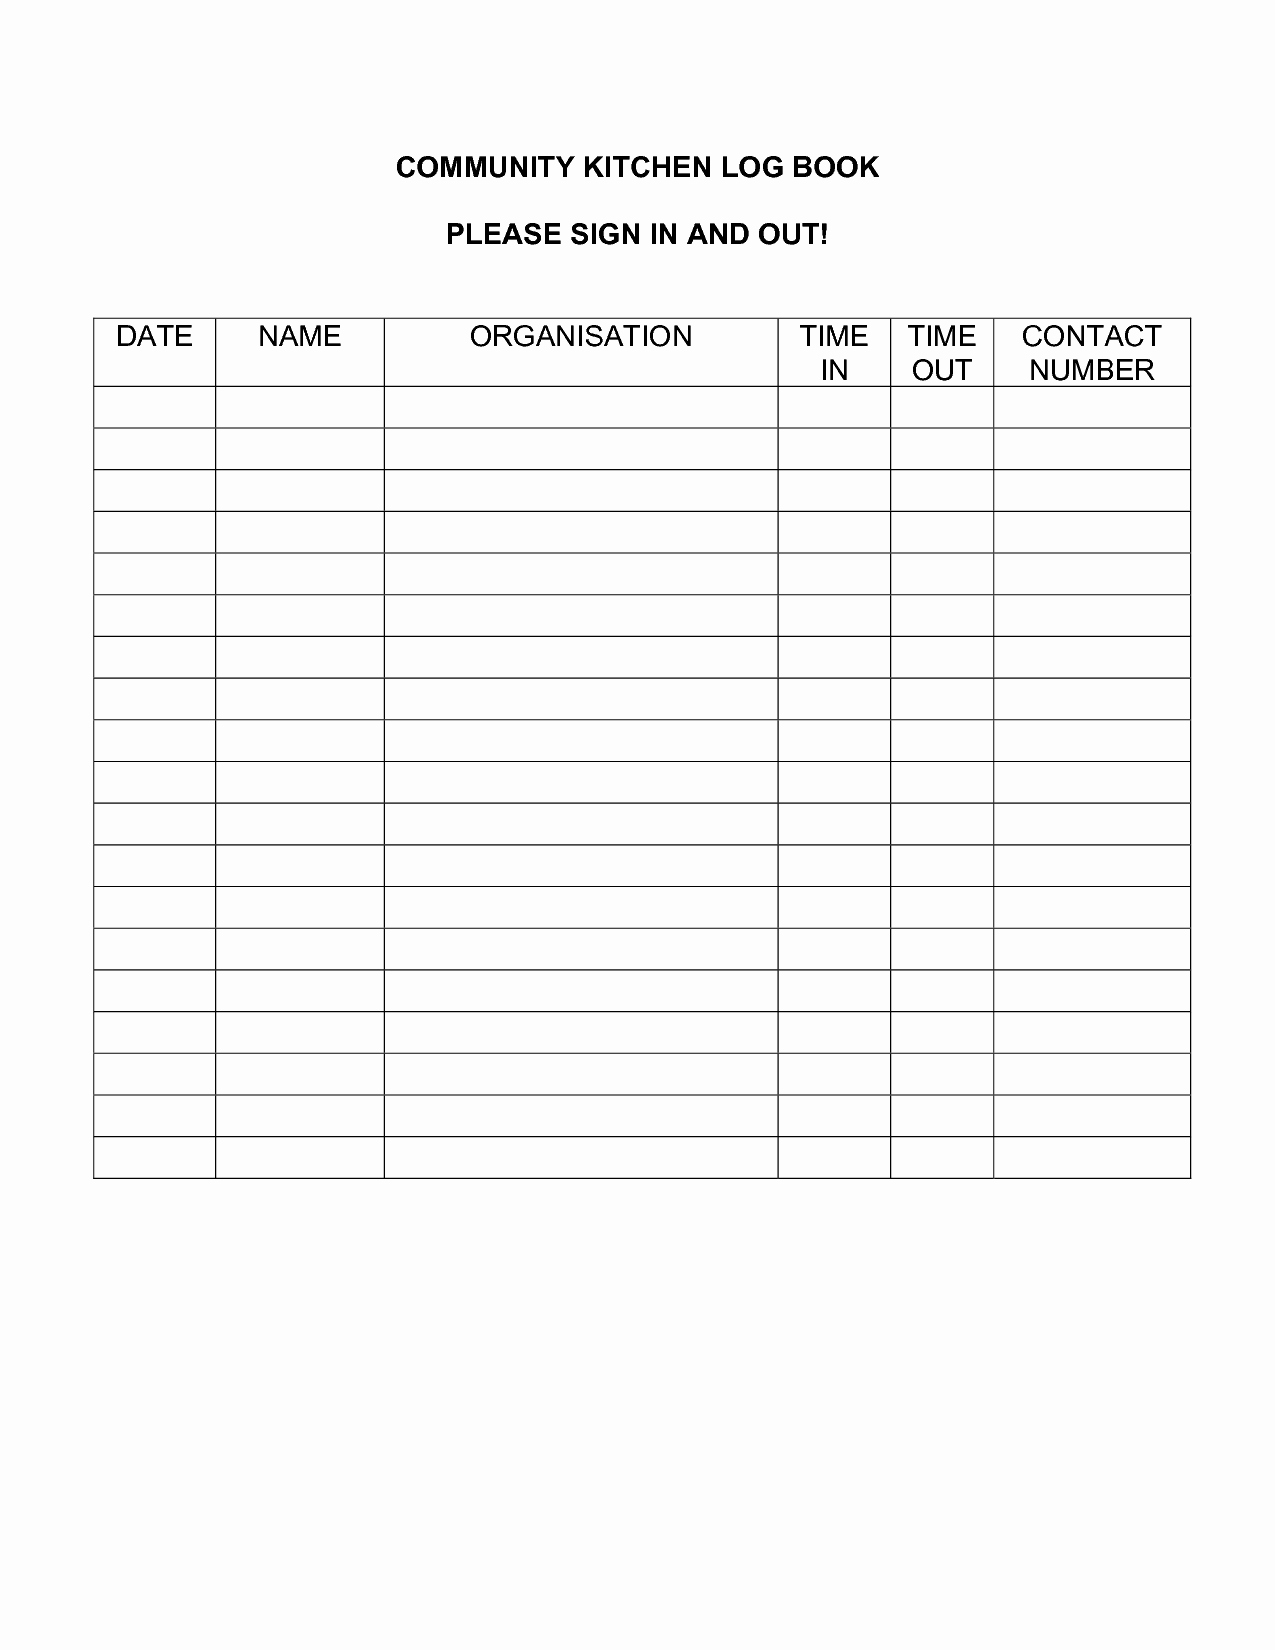 Book Sign Out Sheet Template Lovely Best S Of Textbook Sign Out Log Blank Weekly School